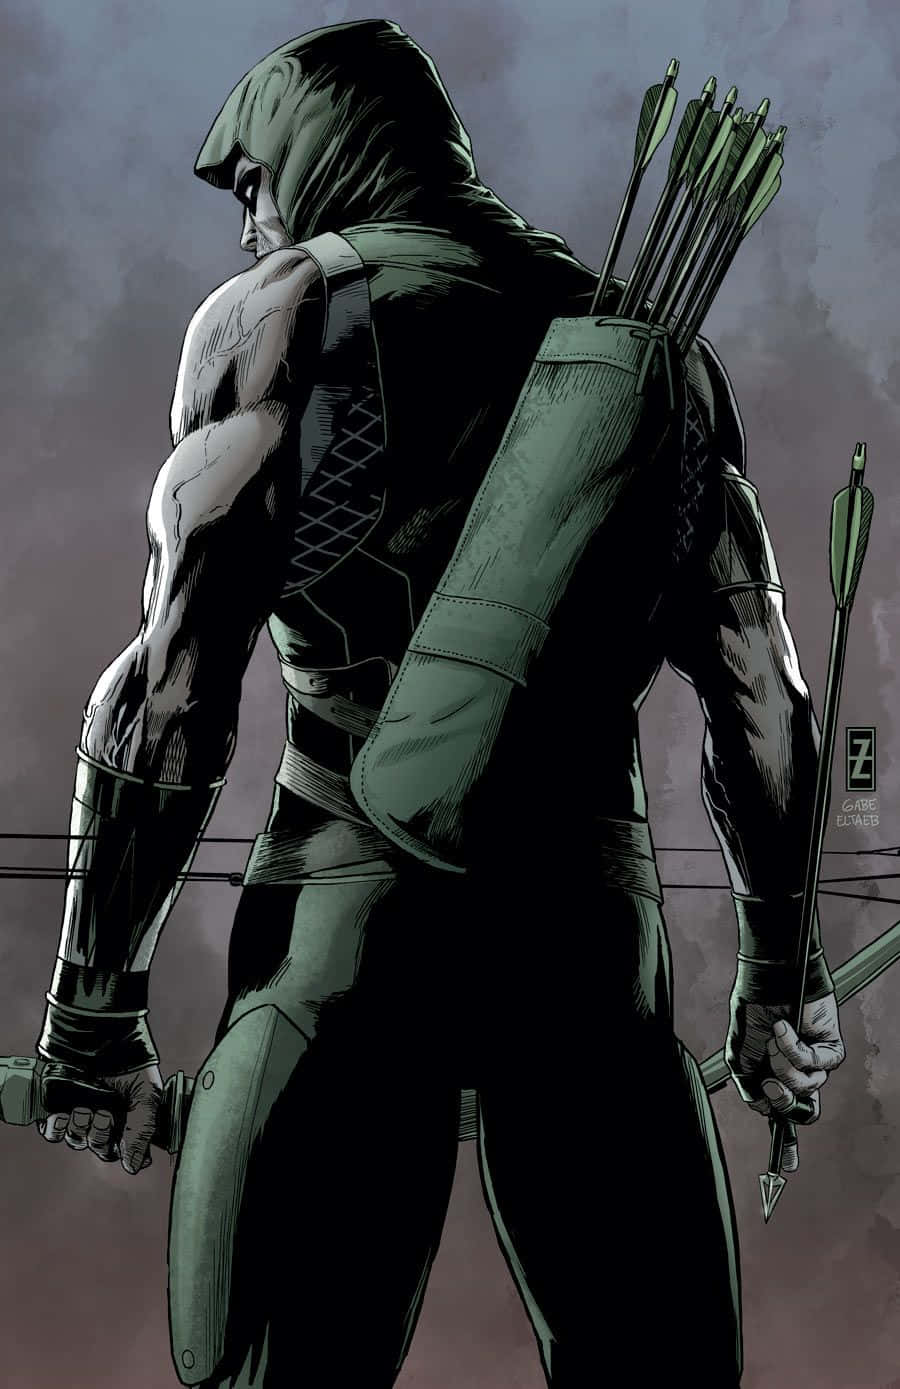 Protect Your Iphone With Green Arrow's Intense Vigilance! Wallpaper